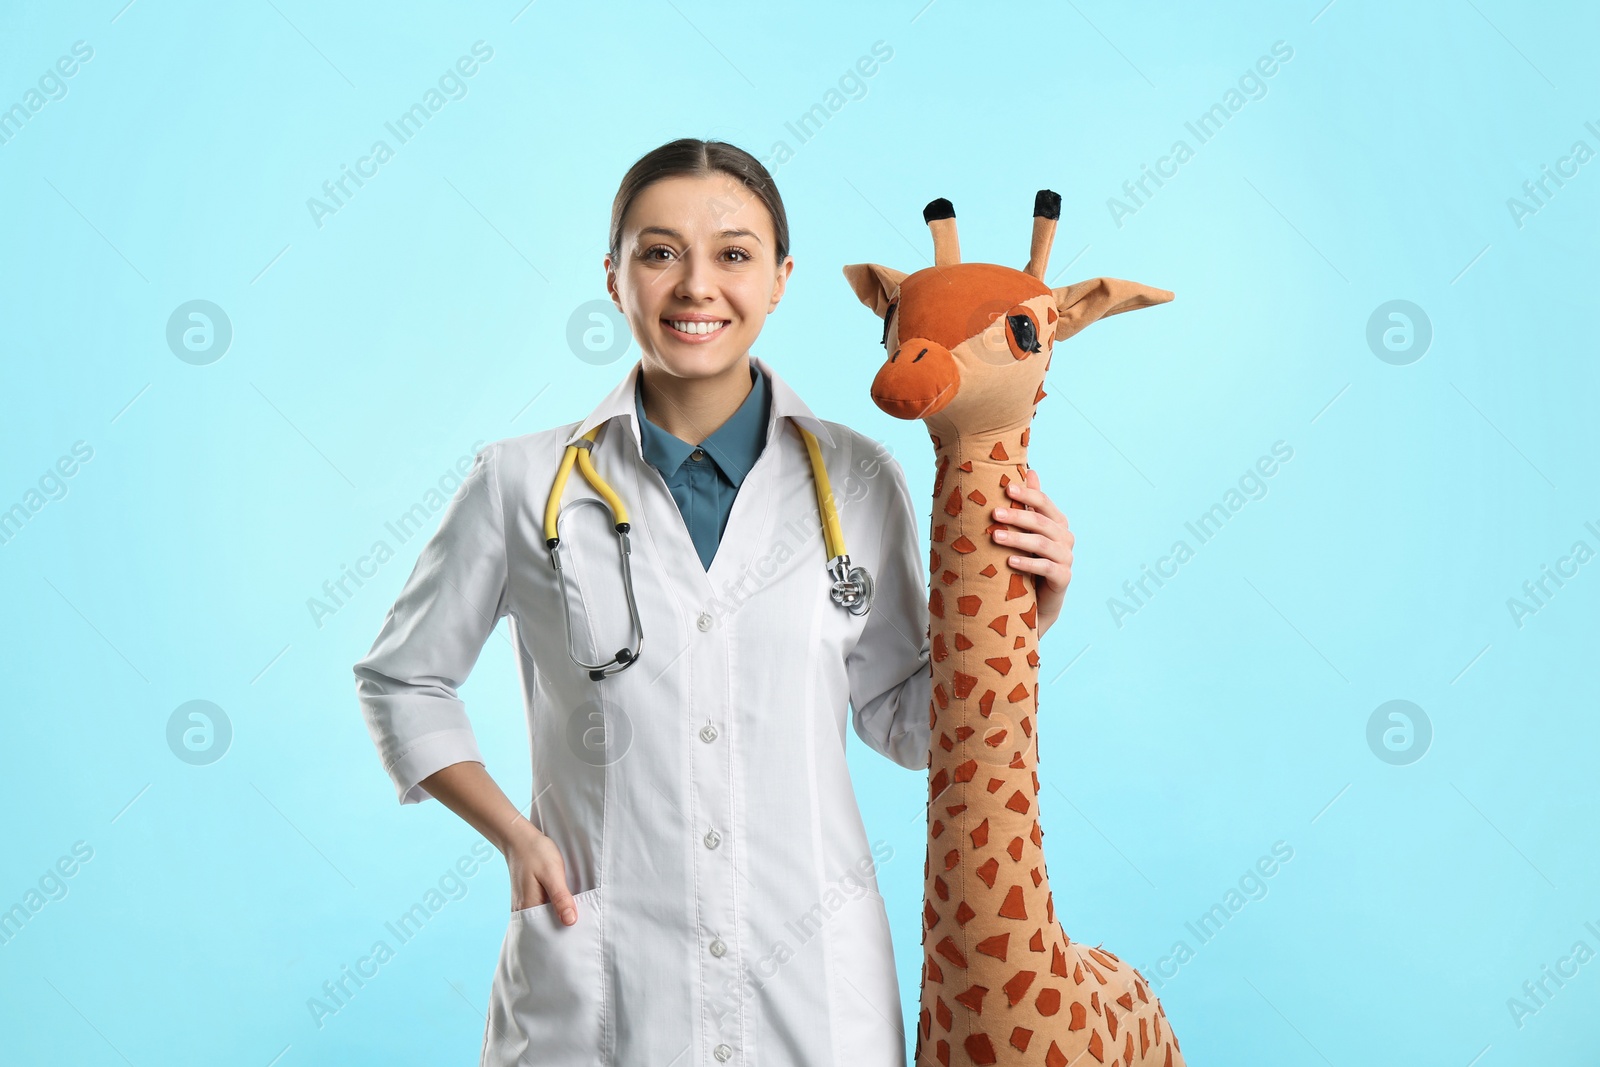 Photo of Pediatrician with toy giraffe and stethoscope on turquoise background